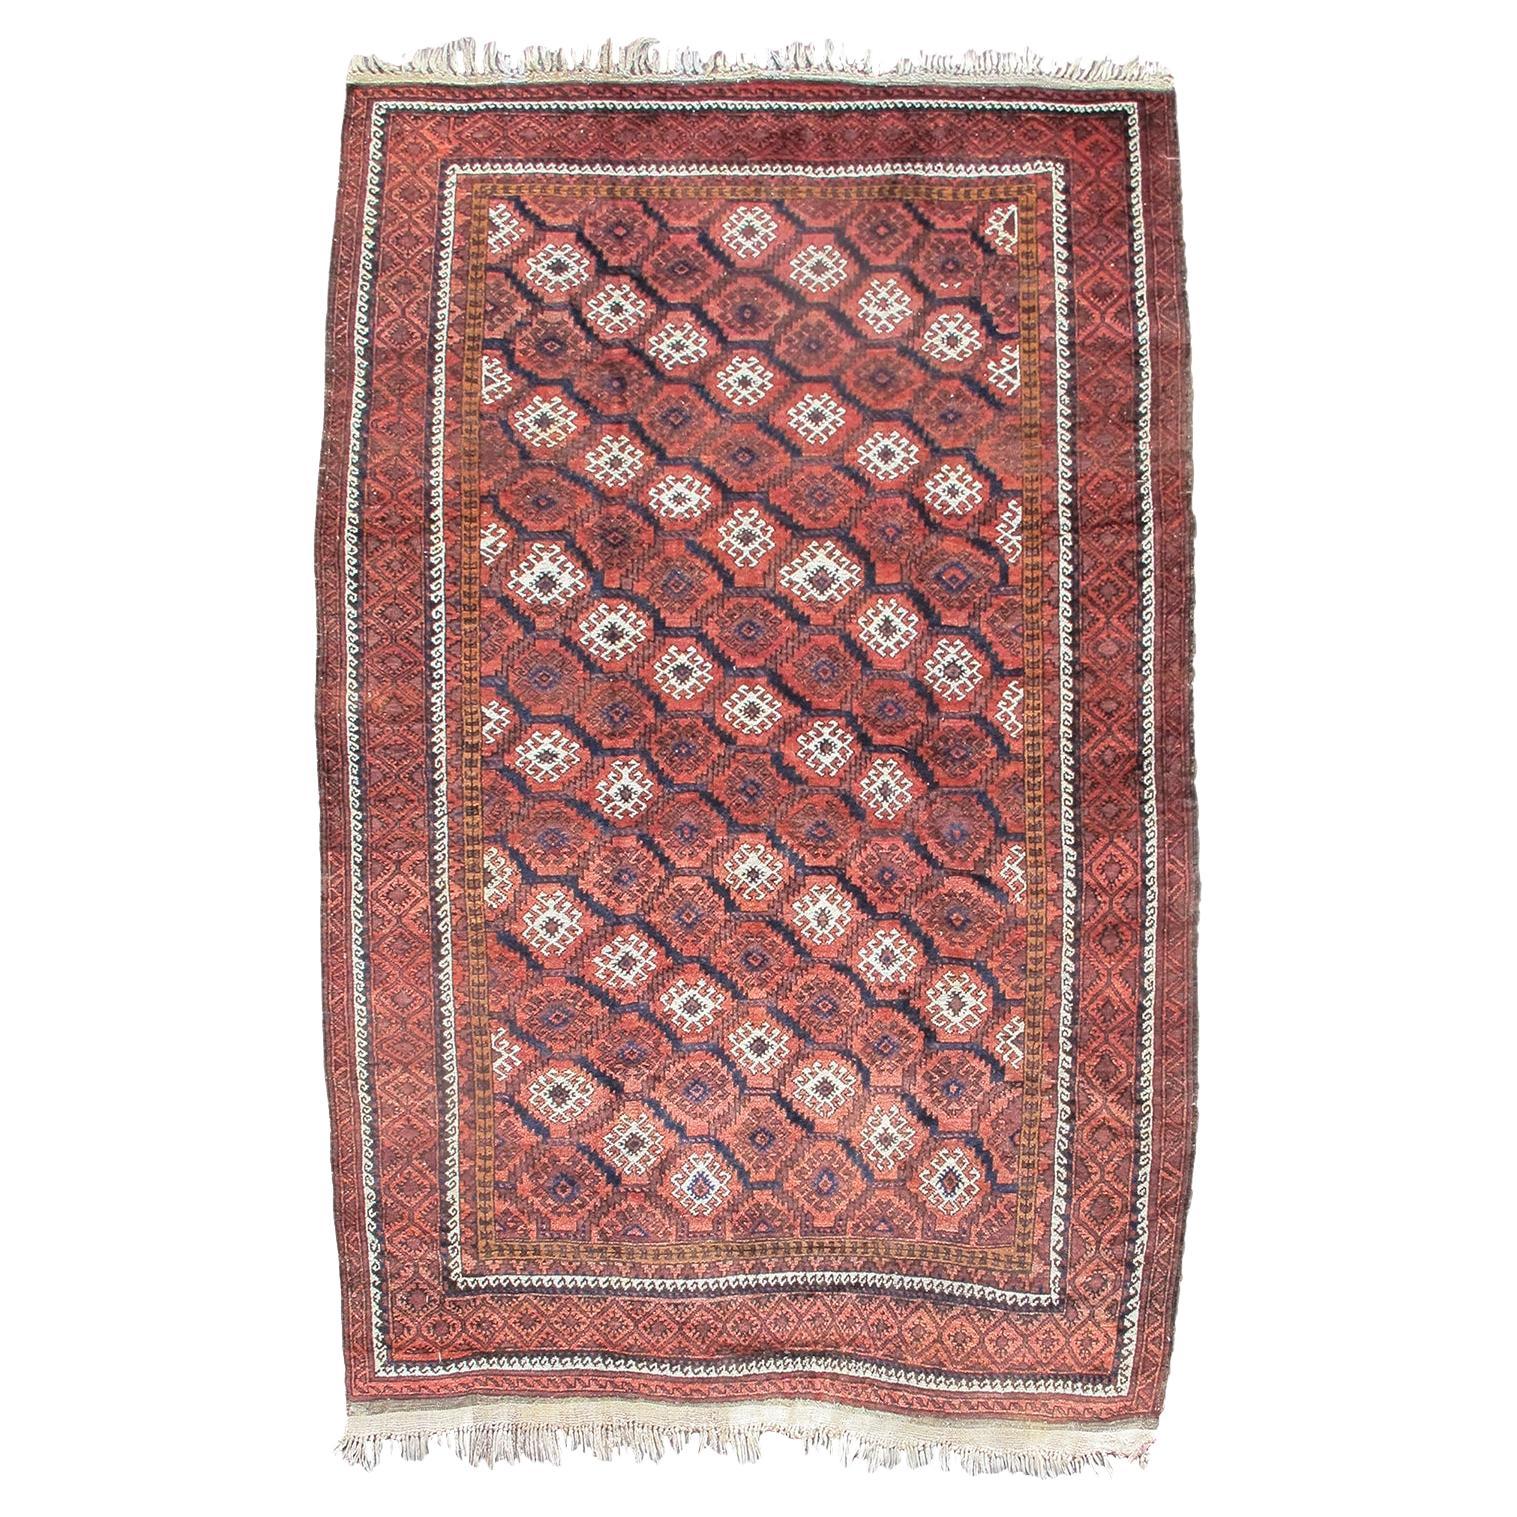 Antique Afghan Baluch Rug, Early 20th Century